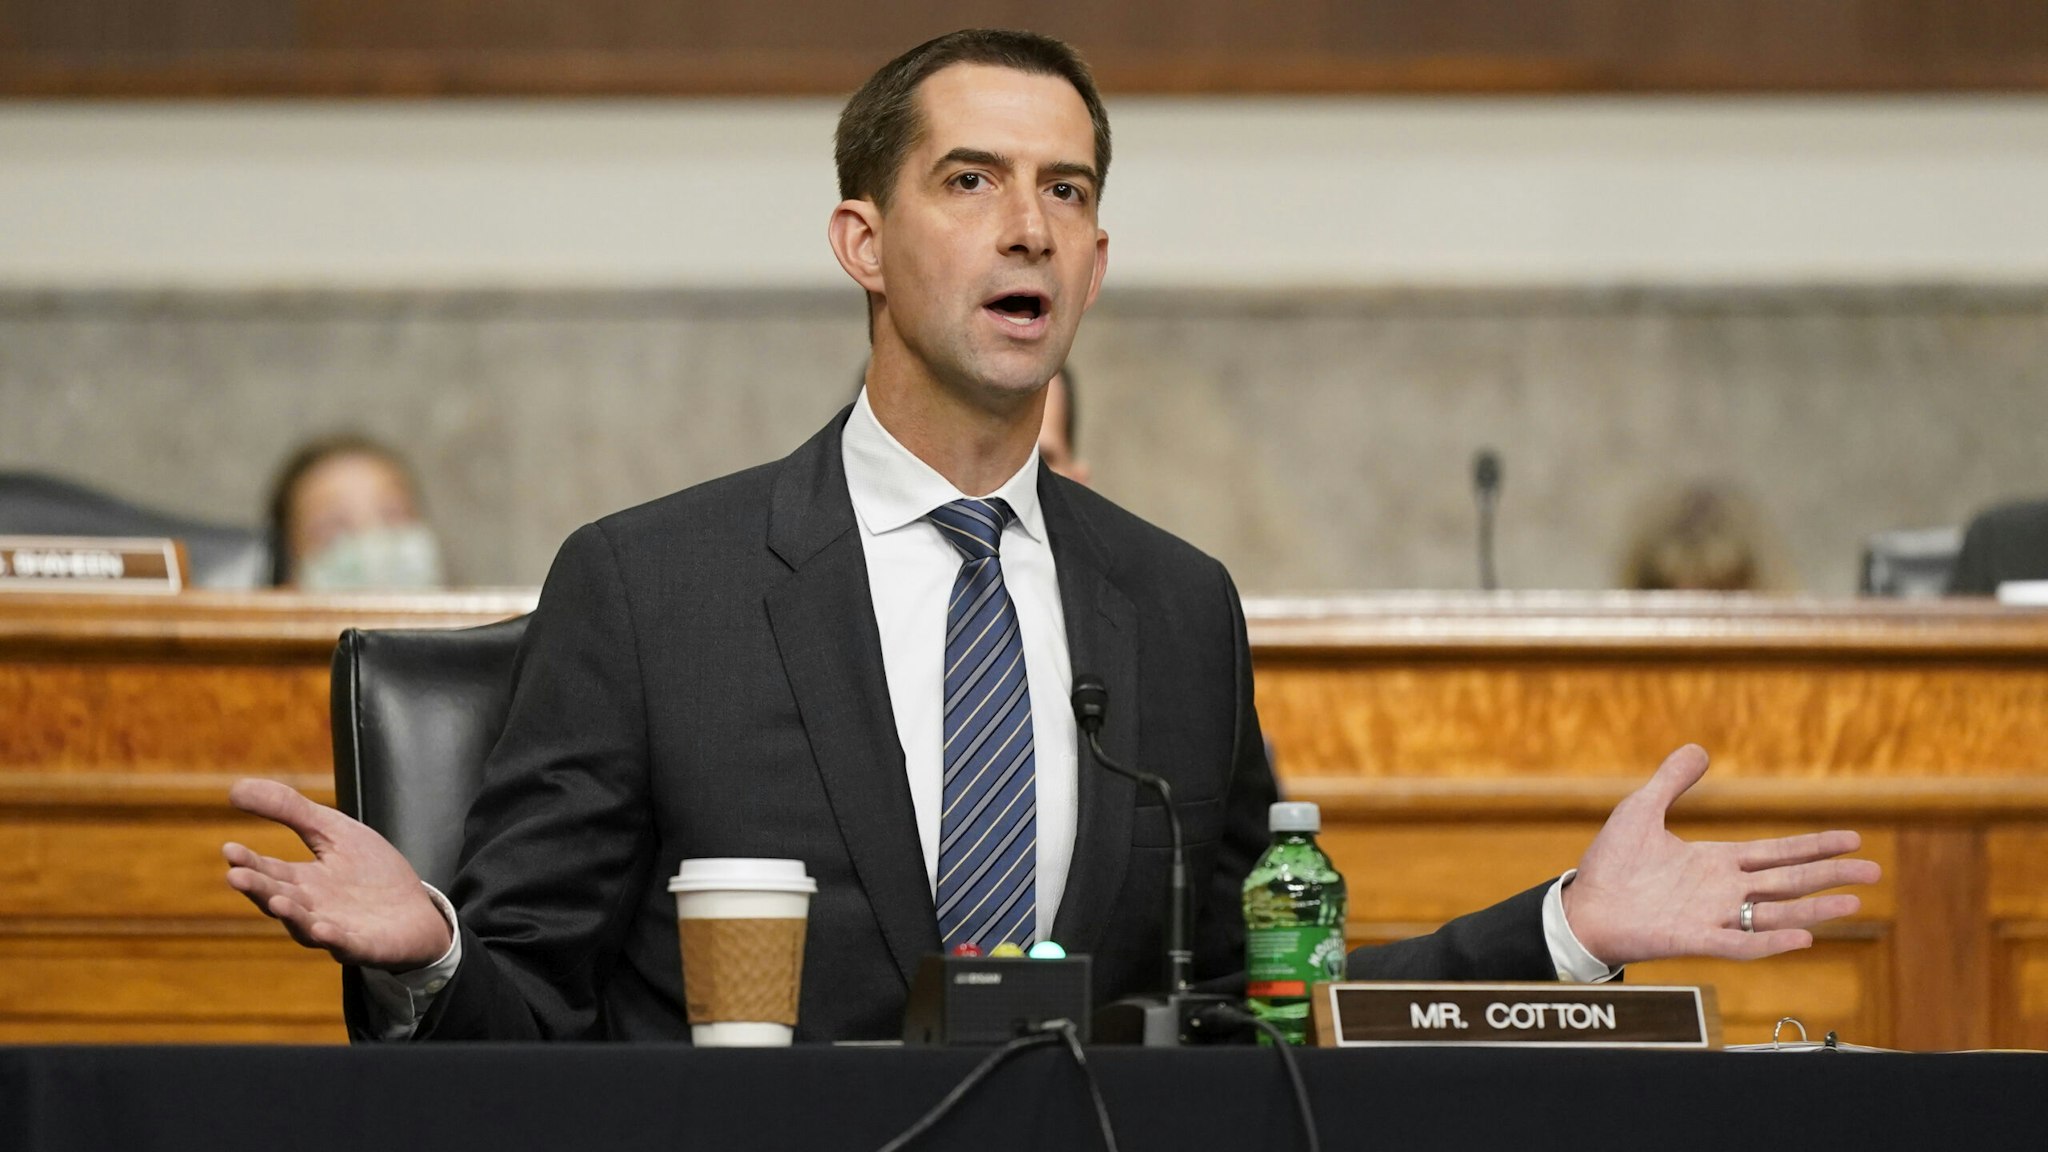 WASHINGTON, DC - SEPTEMBER 28: Sen. Tom Cotton (R-AK) speaks during a Senate Armed Services Committee hearing on the conclusion of military operations in Afghanistan and plans for future counterterrorism operations on Capitol Hill on September 28, 2021 in Washington, DC.